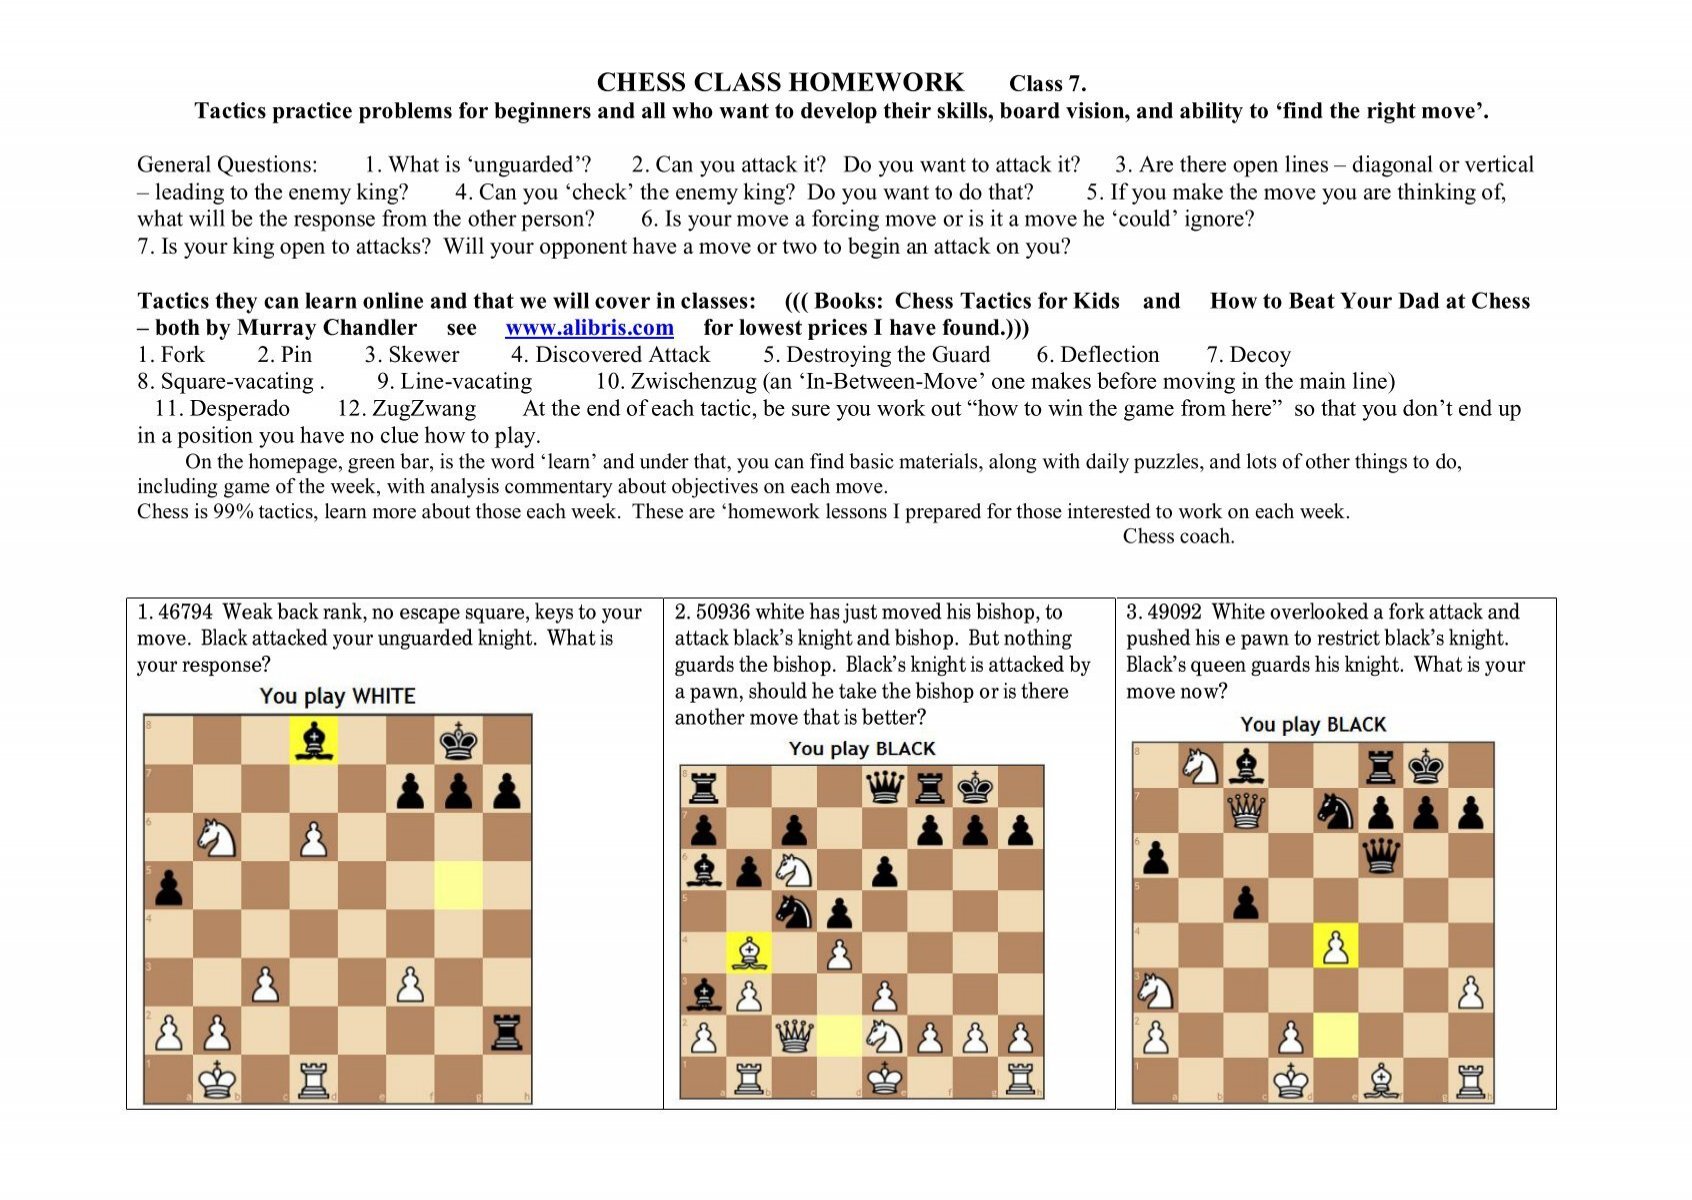 How To Win With Zugzwang - Chess Lessons 